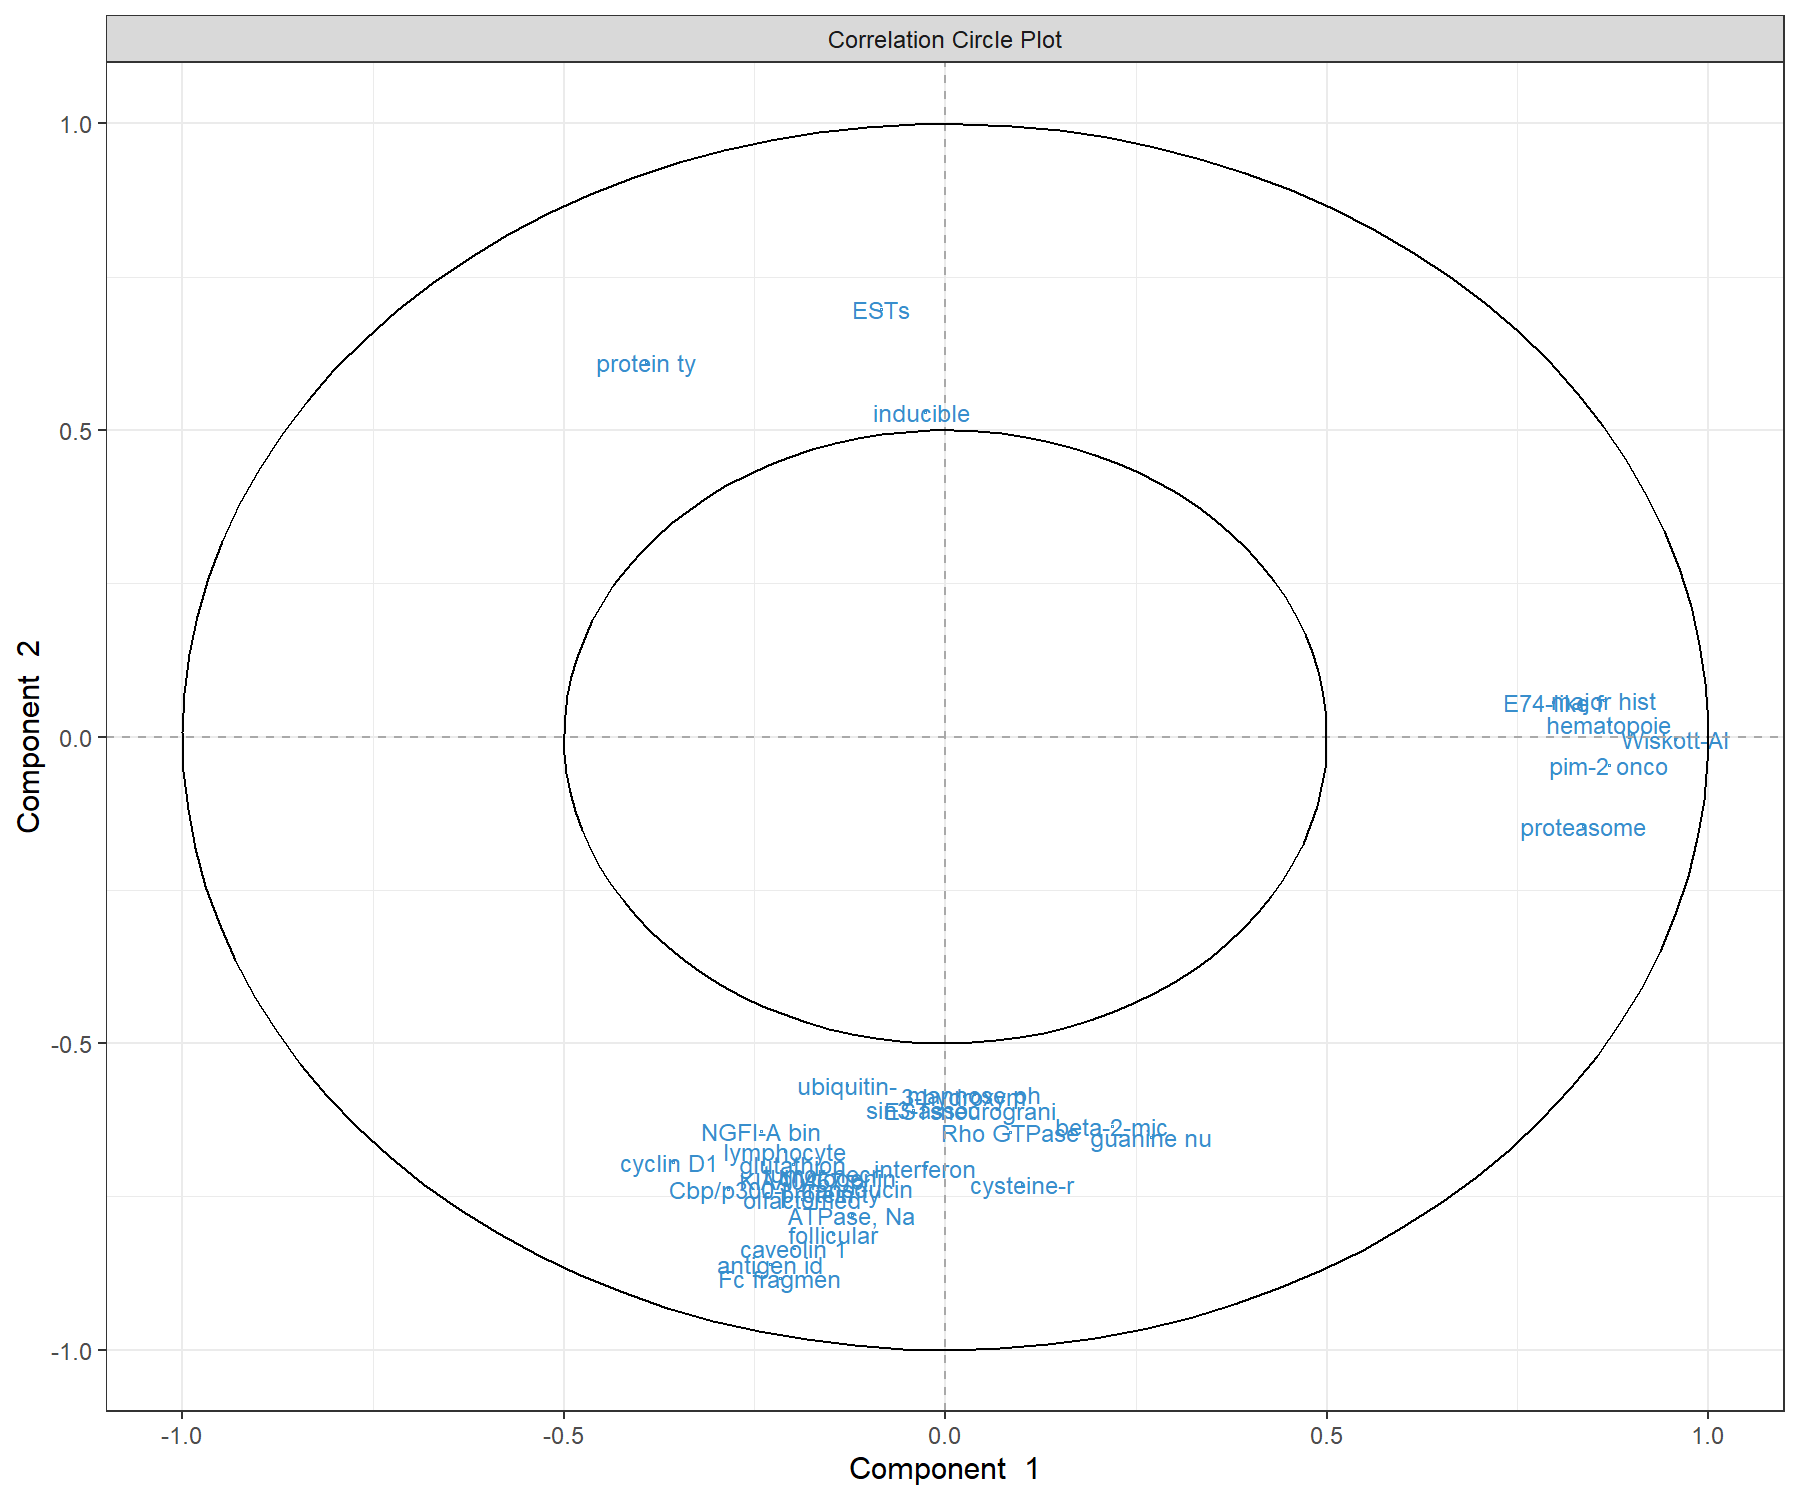 Correlation circle plot representing the genes selected by sPLS-DA performed on the SRBCT gene expression data. Gene names are truncated to the first 10 characters. Only the genes selected by sPLS-DA are shown in components 1 and 2. We observe three groups of genes (positively associated with component 1, and positively or negatively associated with component 2). This graphic should be interpreted in conjunction with the sample plot.